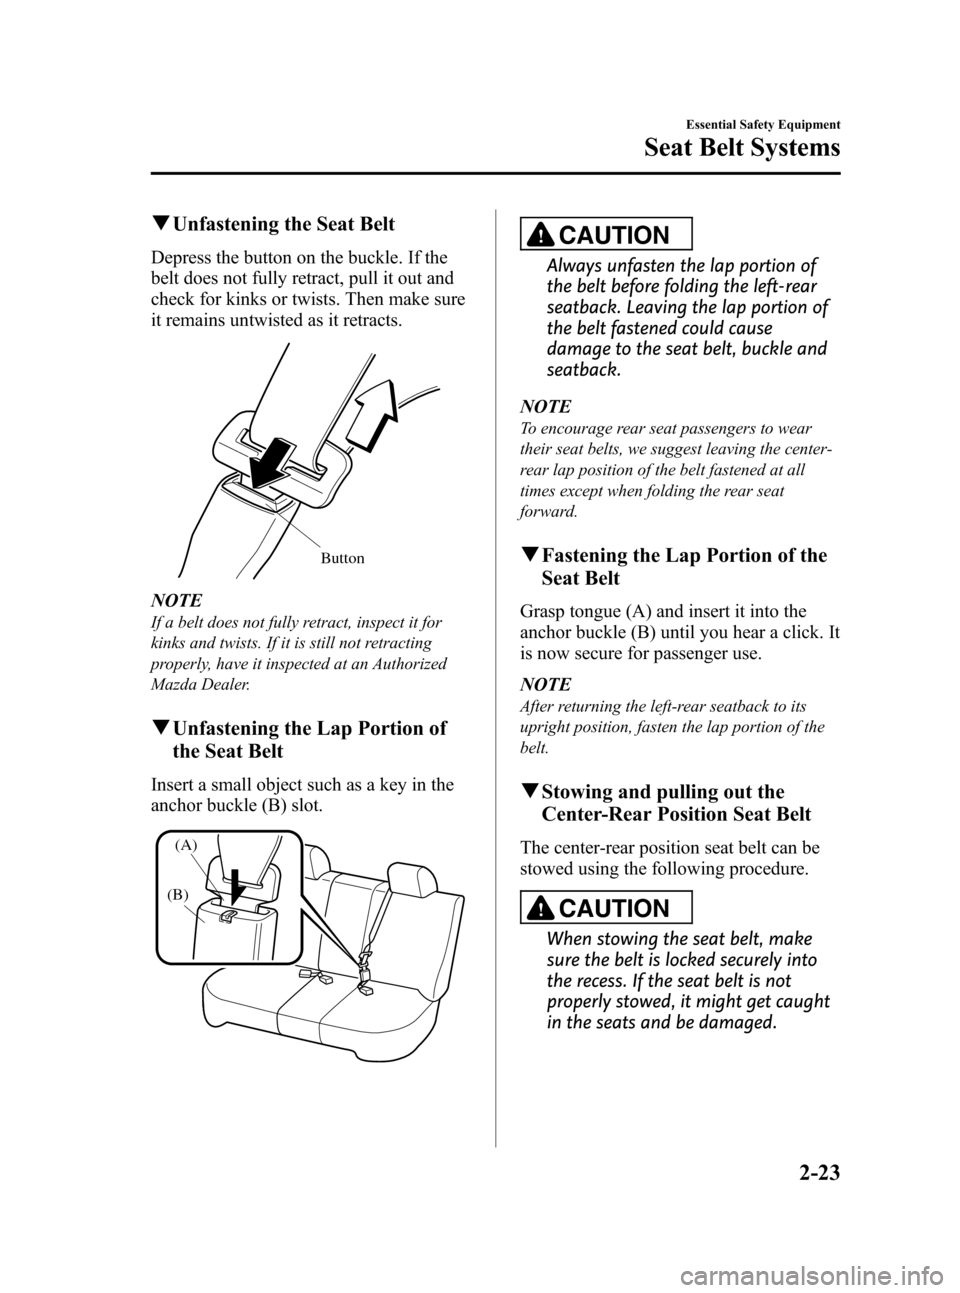 MAZDA MODEL CX-7 2009  Owners Manual (in English) Black plate (35,1)
qUnfastening the Seat Belt
Depress the button on the buckle. If the
belt does not fully retract, pull it out and
check for kinks or twists. Then make sure
it remains untwisted as it